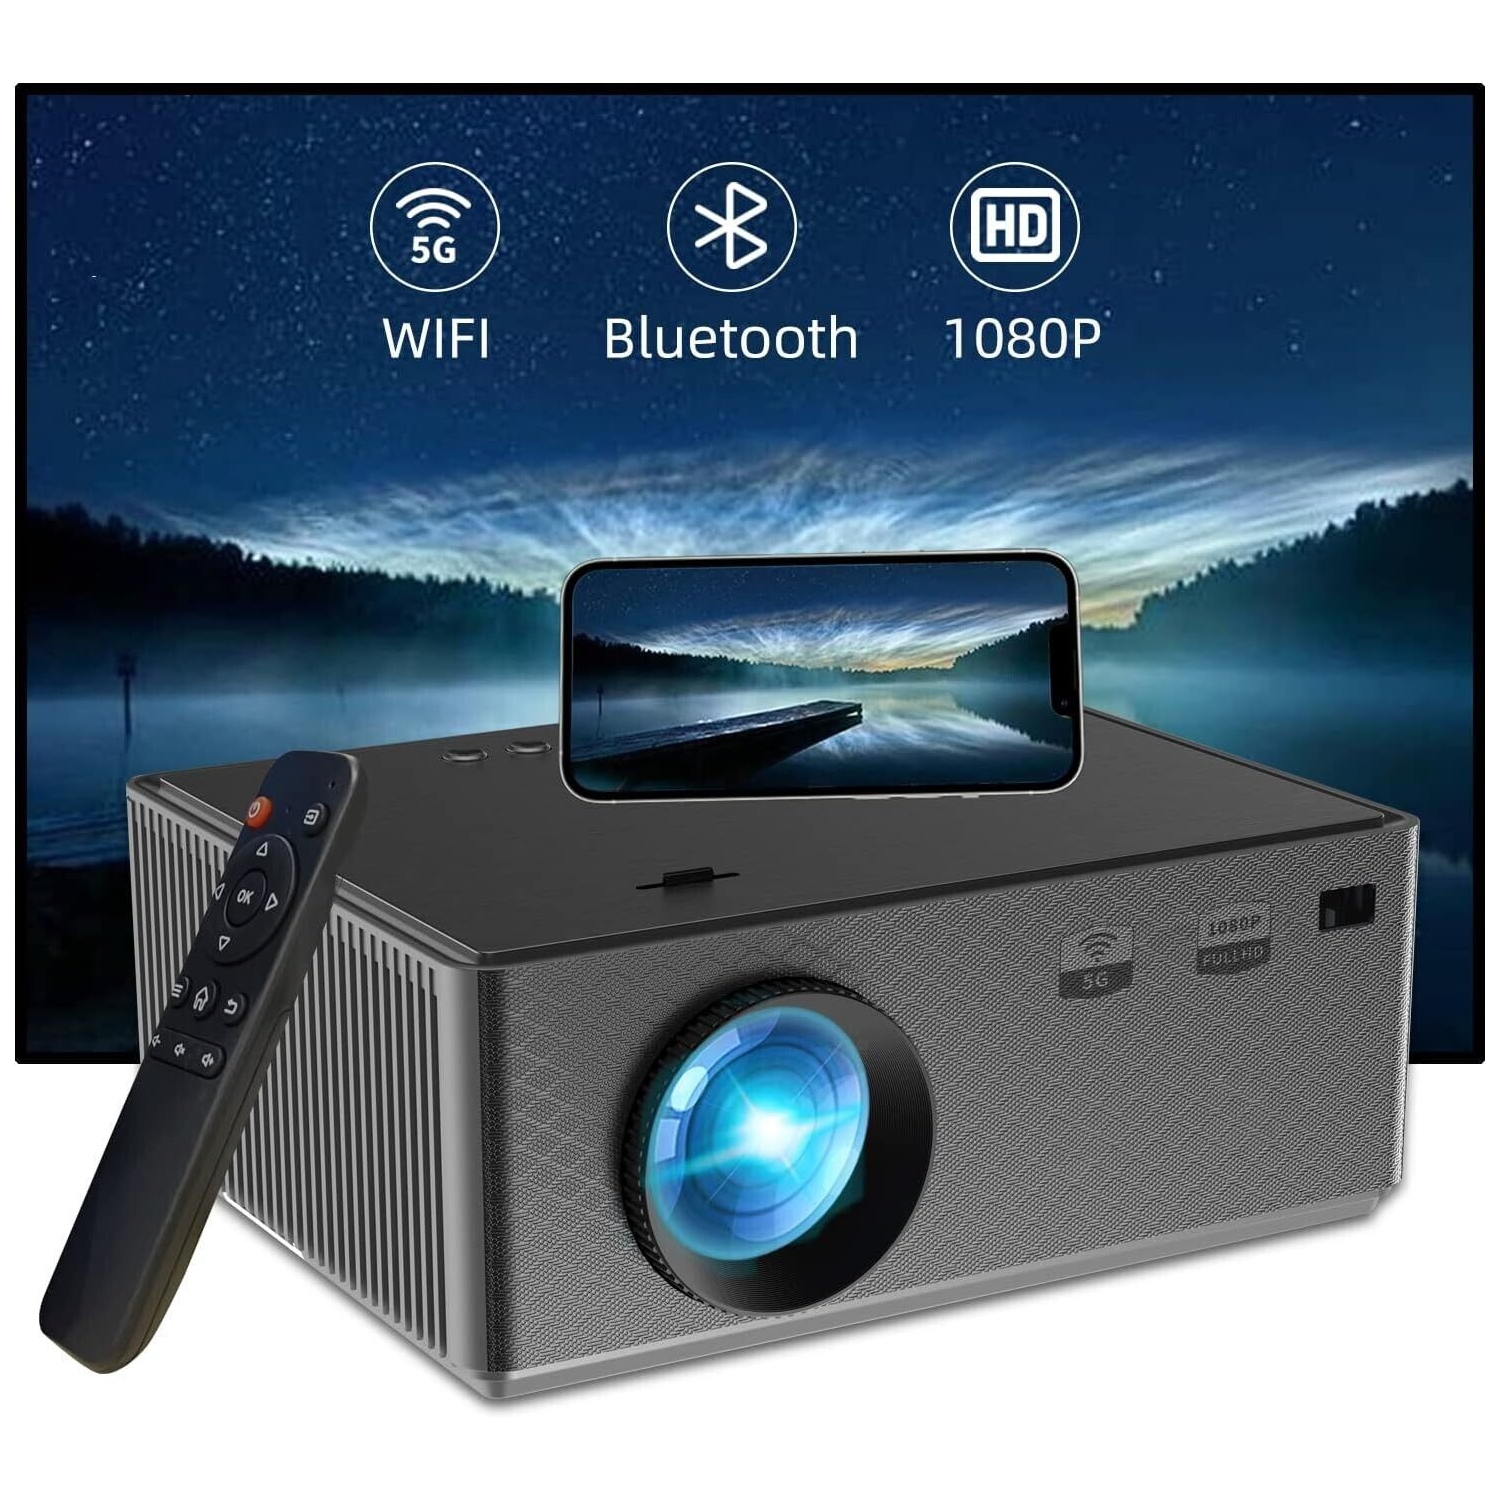 ILIMPID Video Projector - Native 1080p Full HD, WiFi, Bluetooth, 9500 Lumens, Compatible with HDMI USB Smartphone TV Stick PC for Outdoor/Home Projection